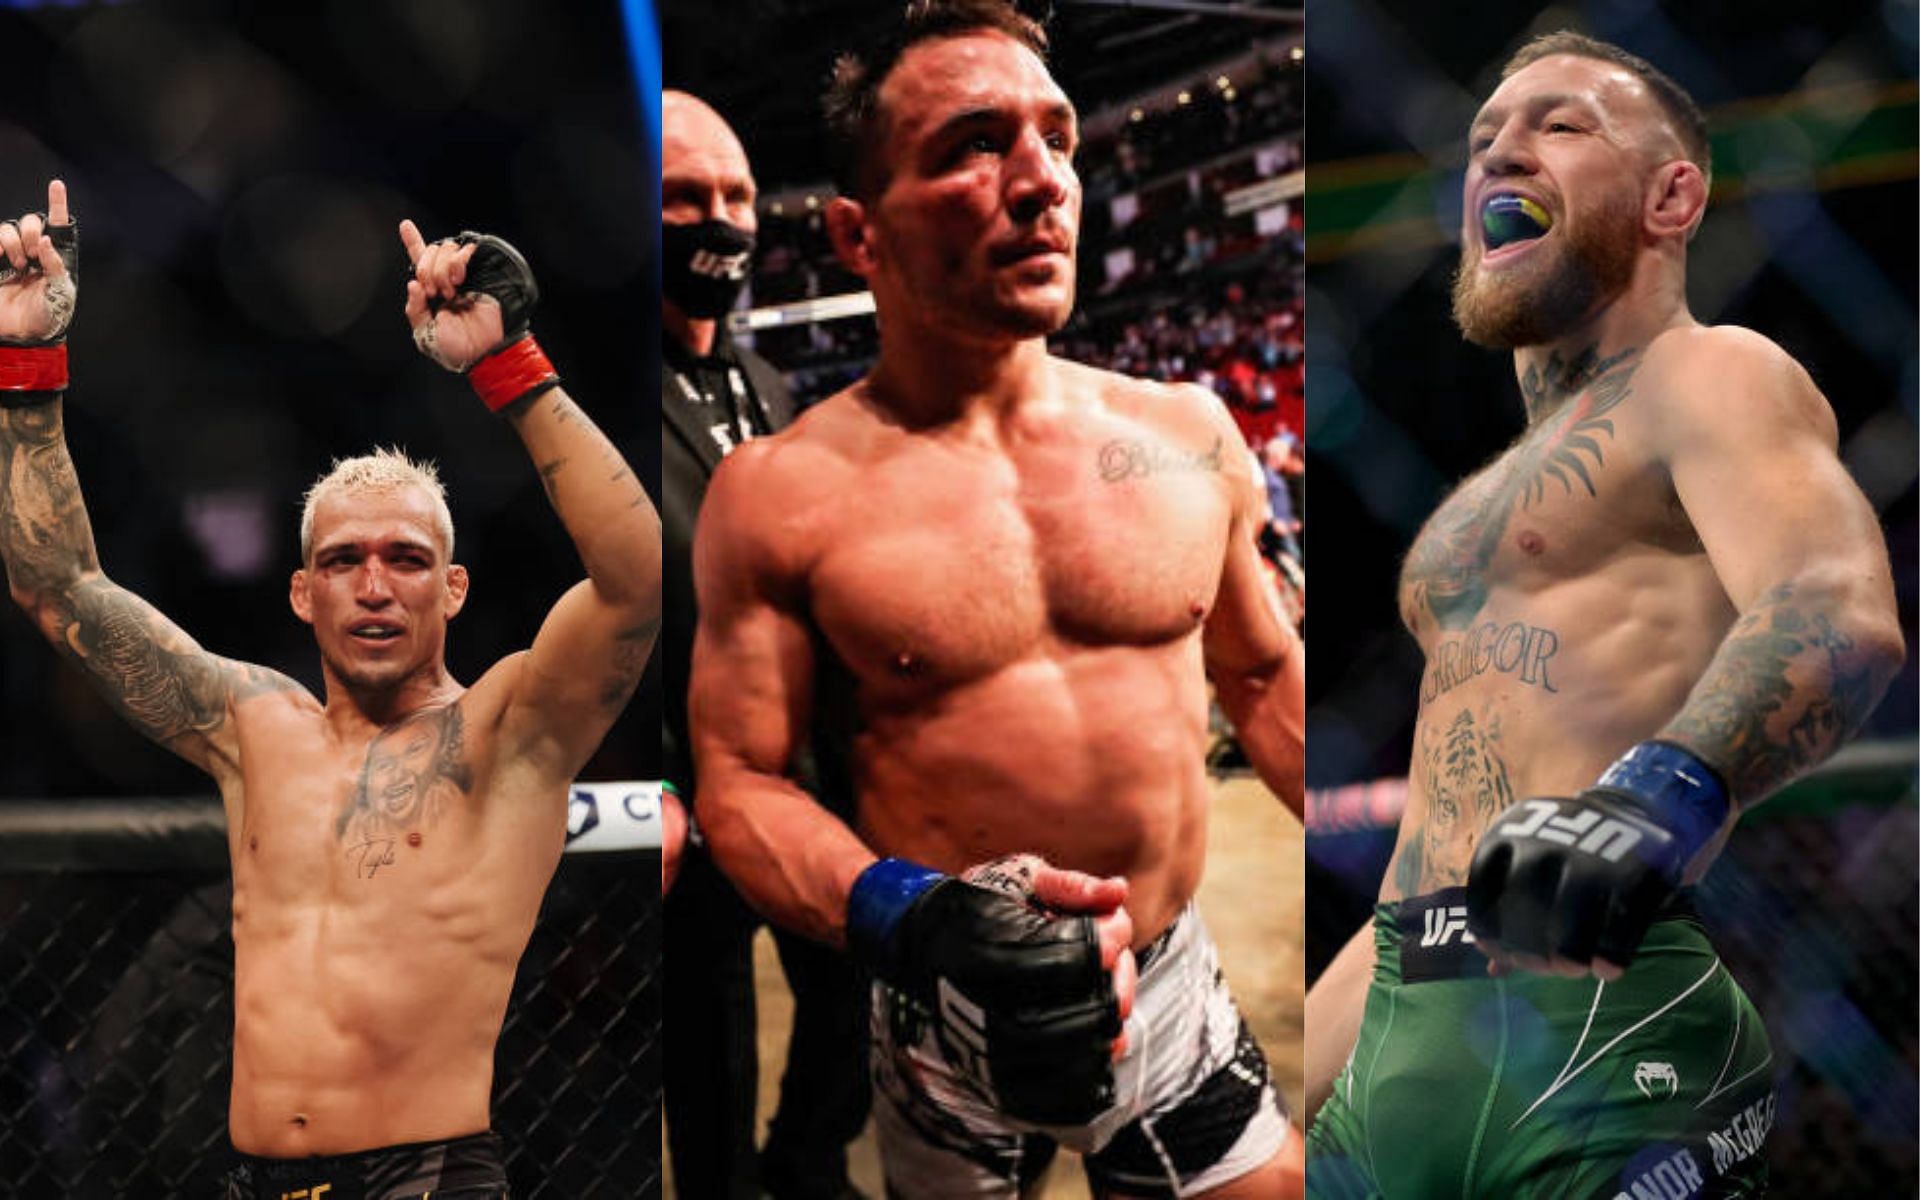 From left to right: Charles Oliveira, Michael Chandler, and Conor McGregor